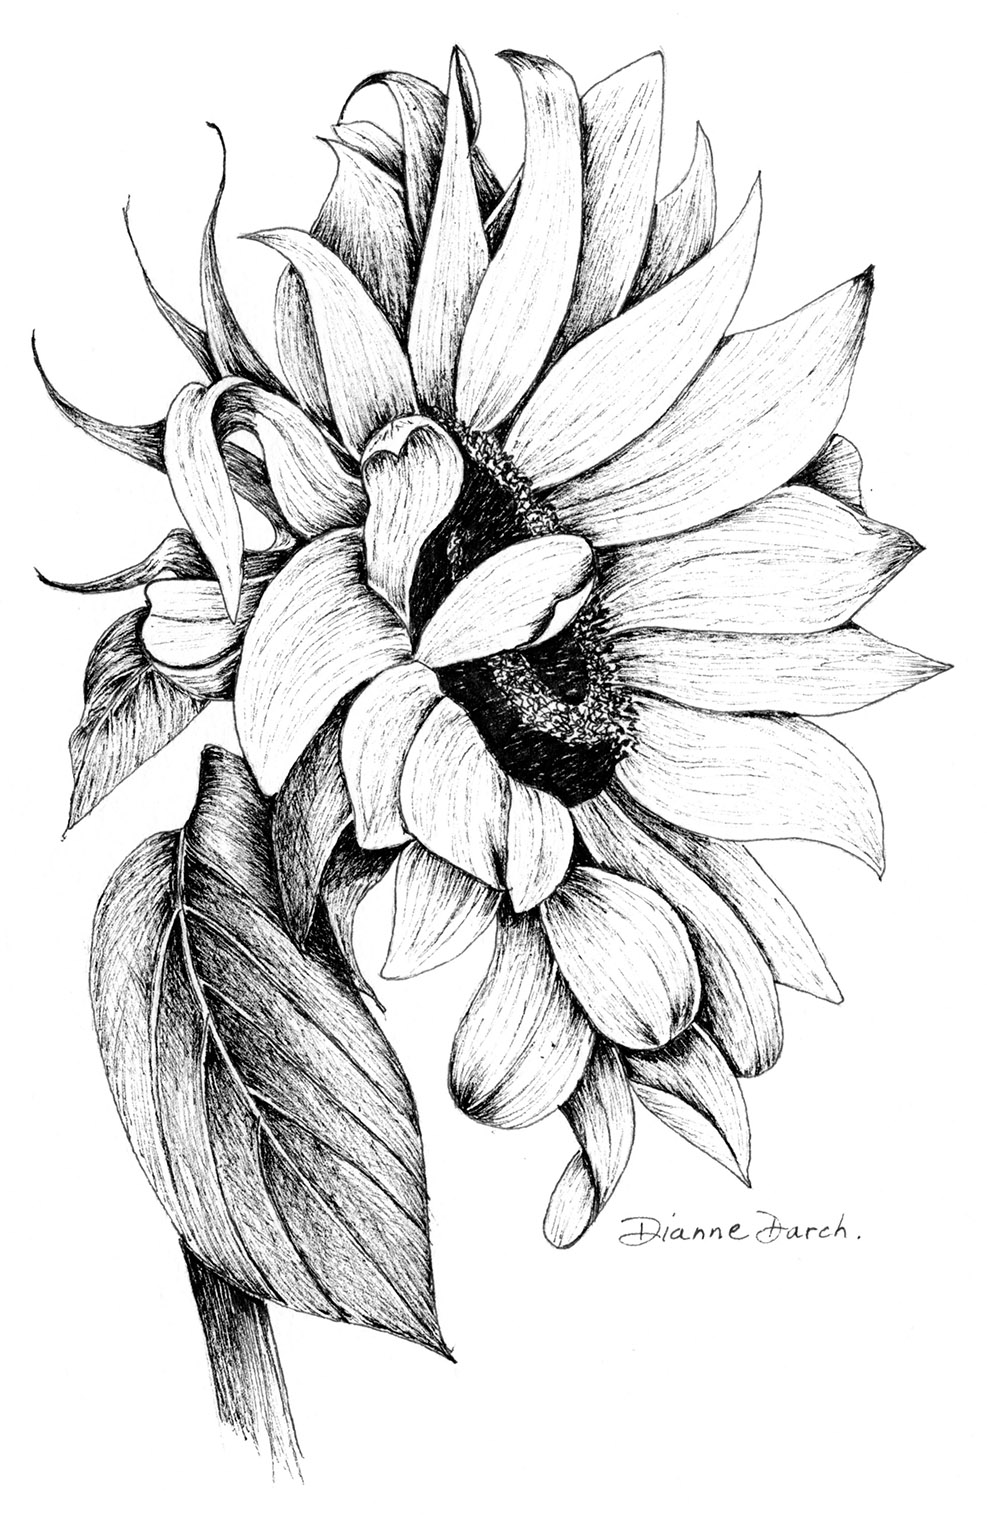 Pen and Ink with Dianne Darch